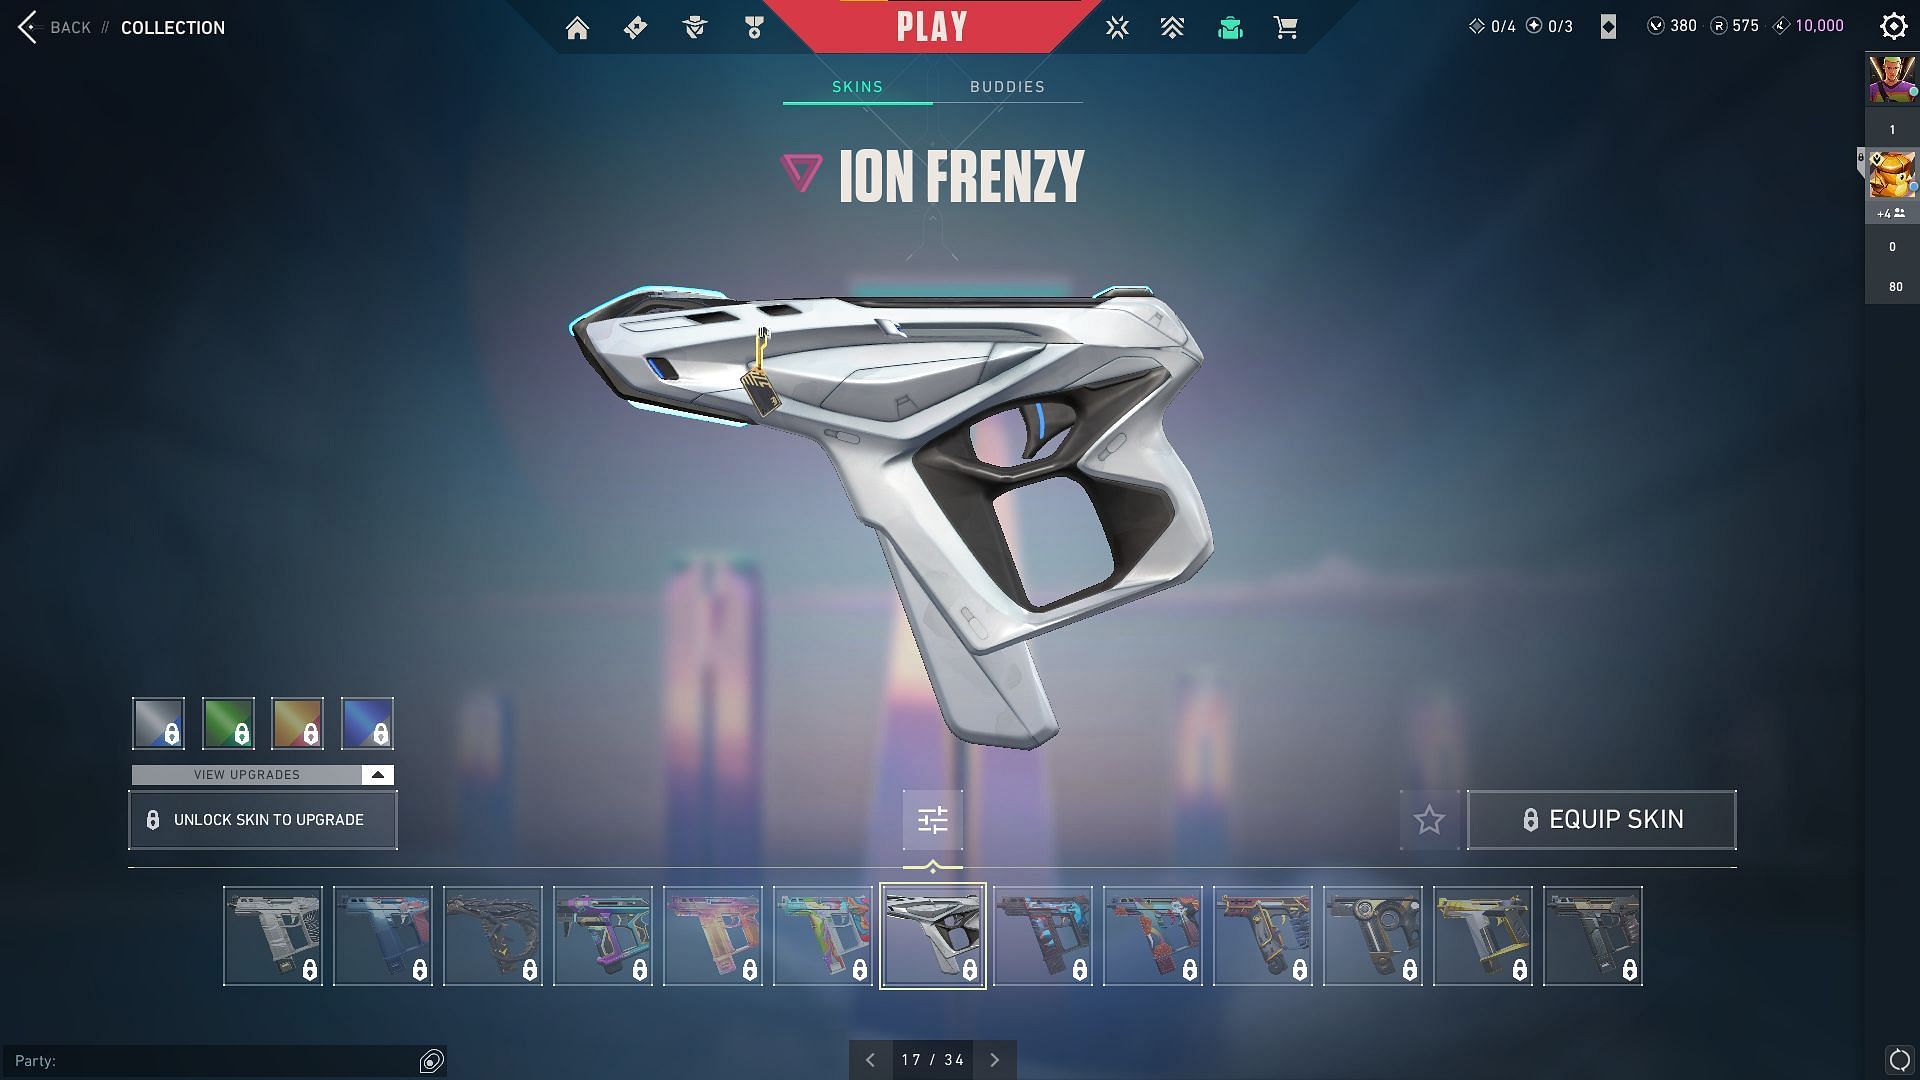 Ion Frenzy(image by Riot Games)